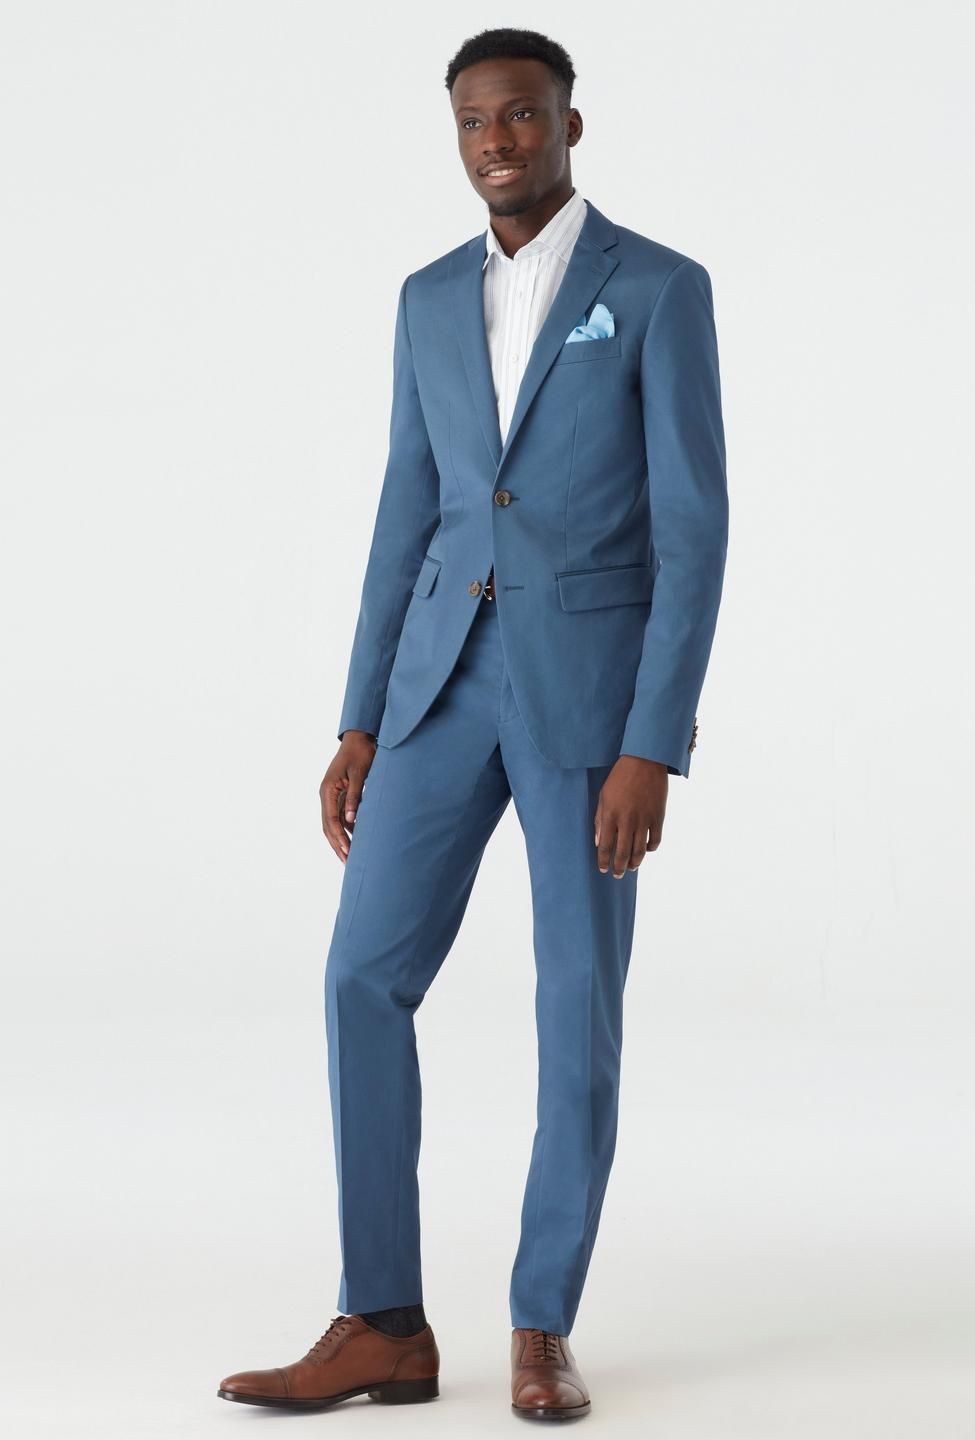 Hartley Cotton Stretch Light Blue Suit | Indochino